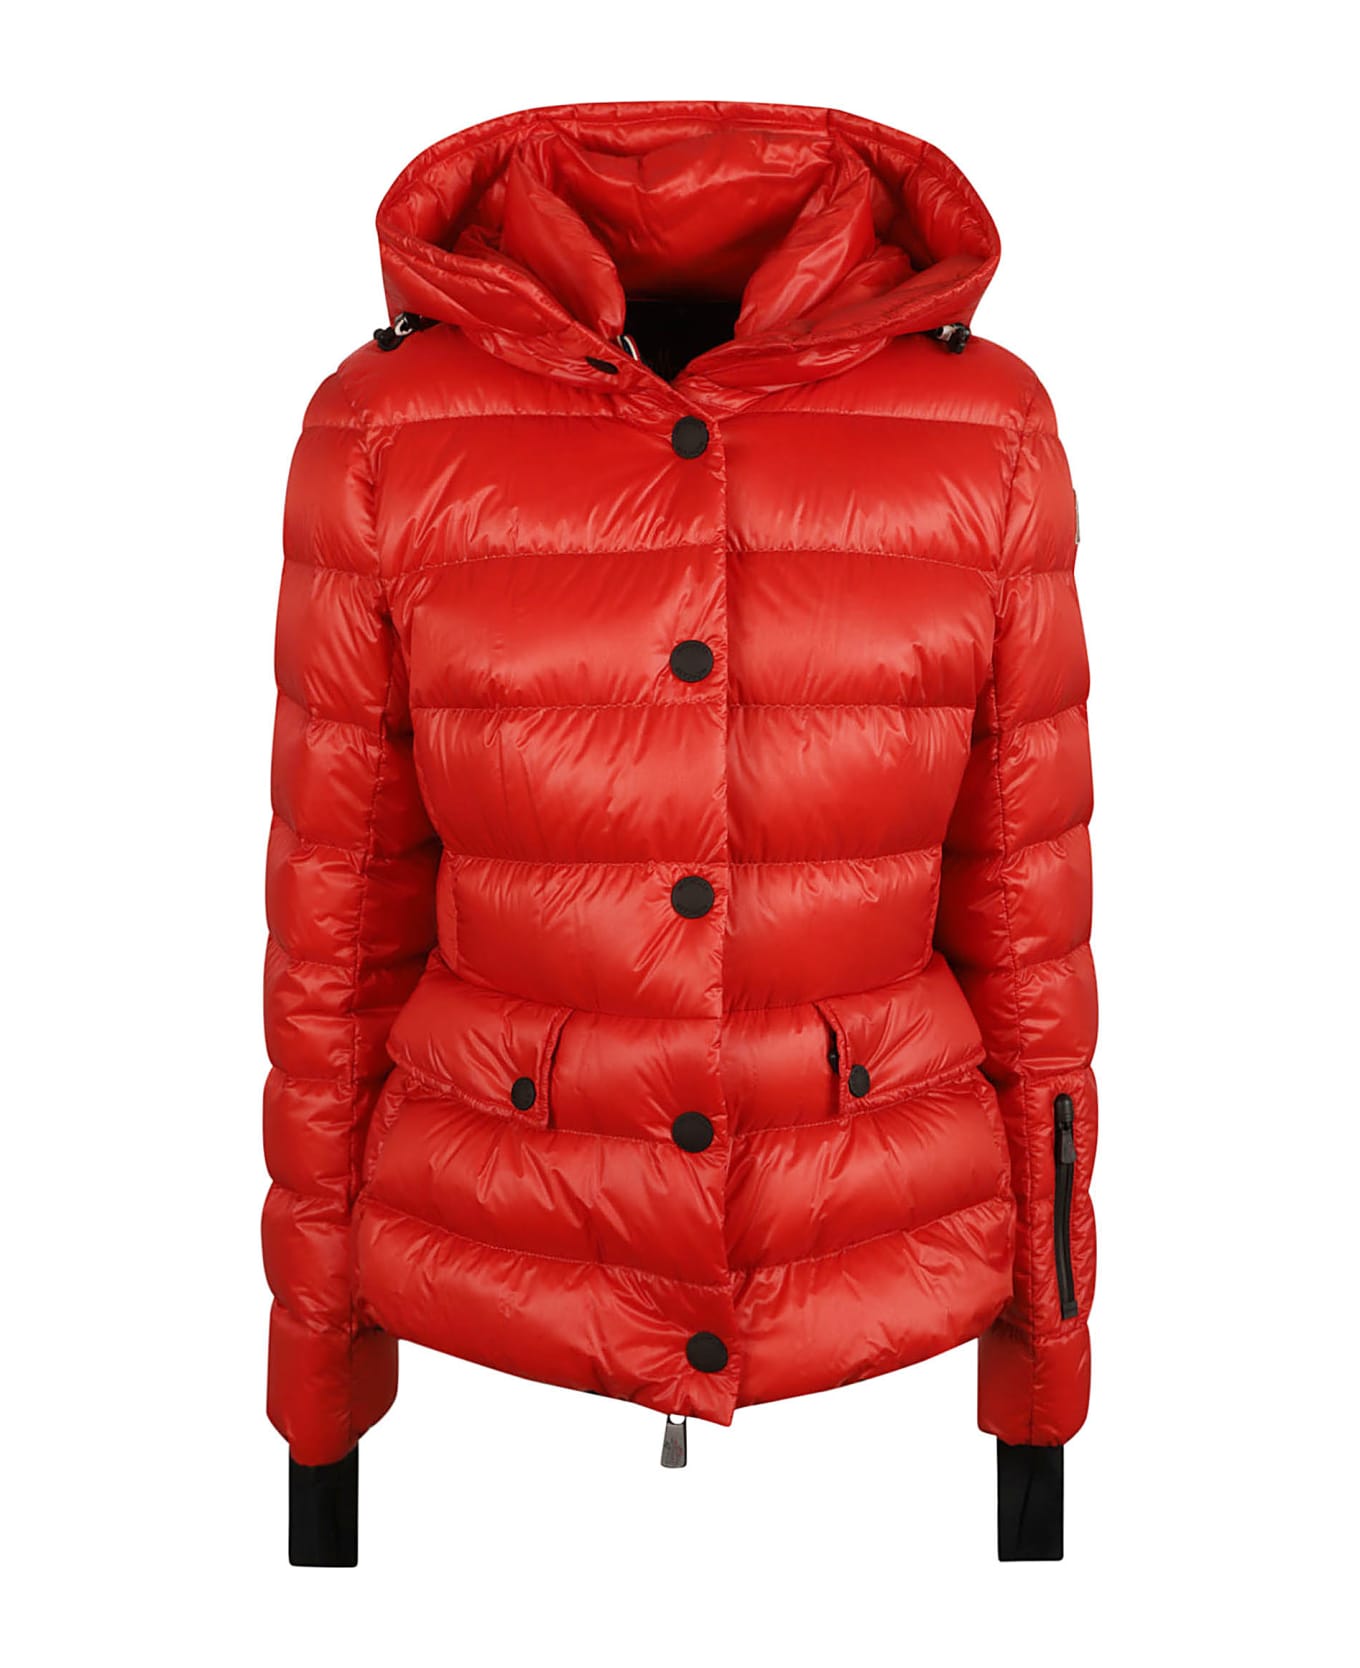 Moncler Grenoble Armoniques Padded Jacket - Red